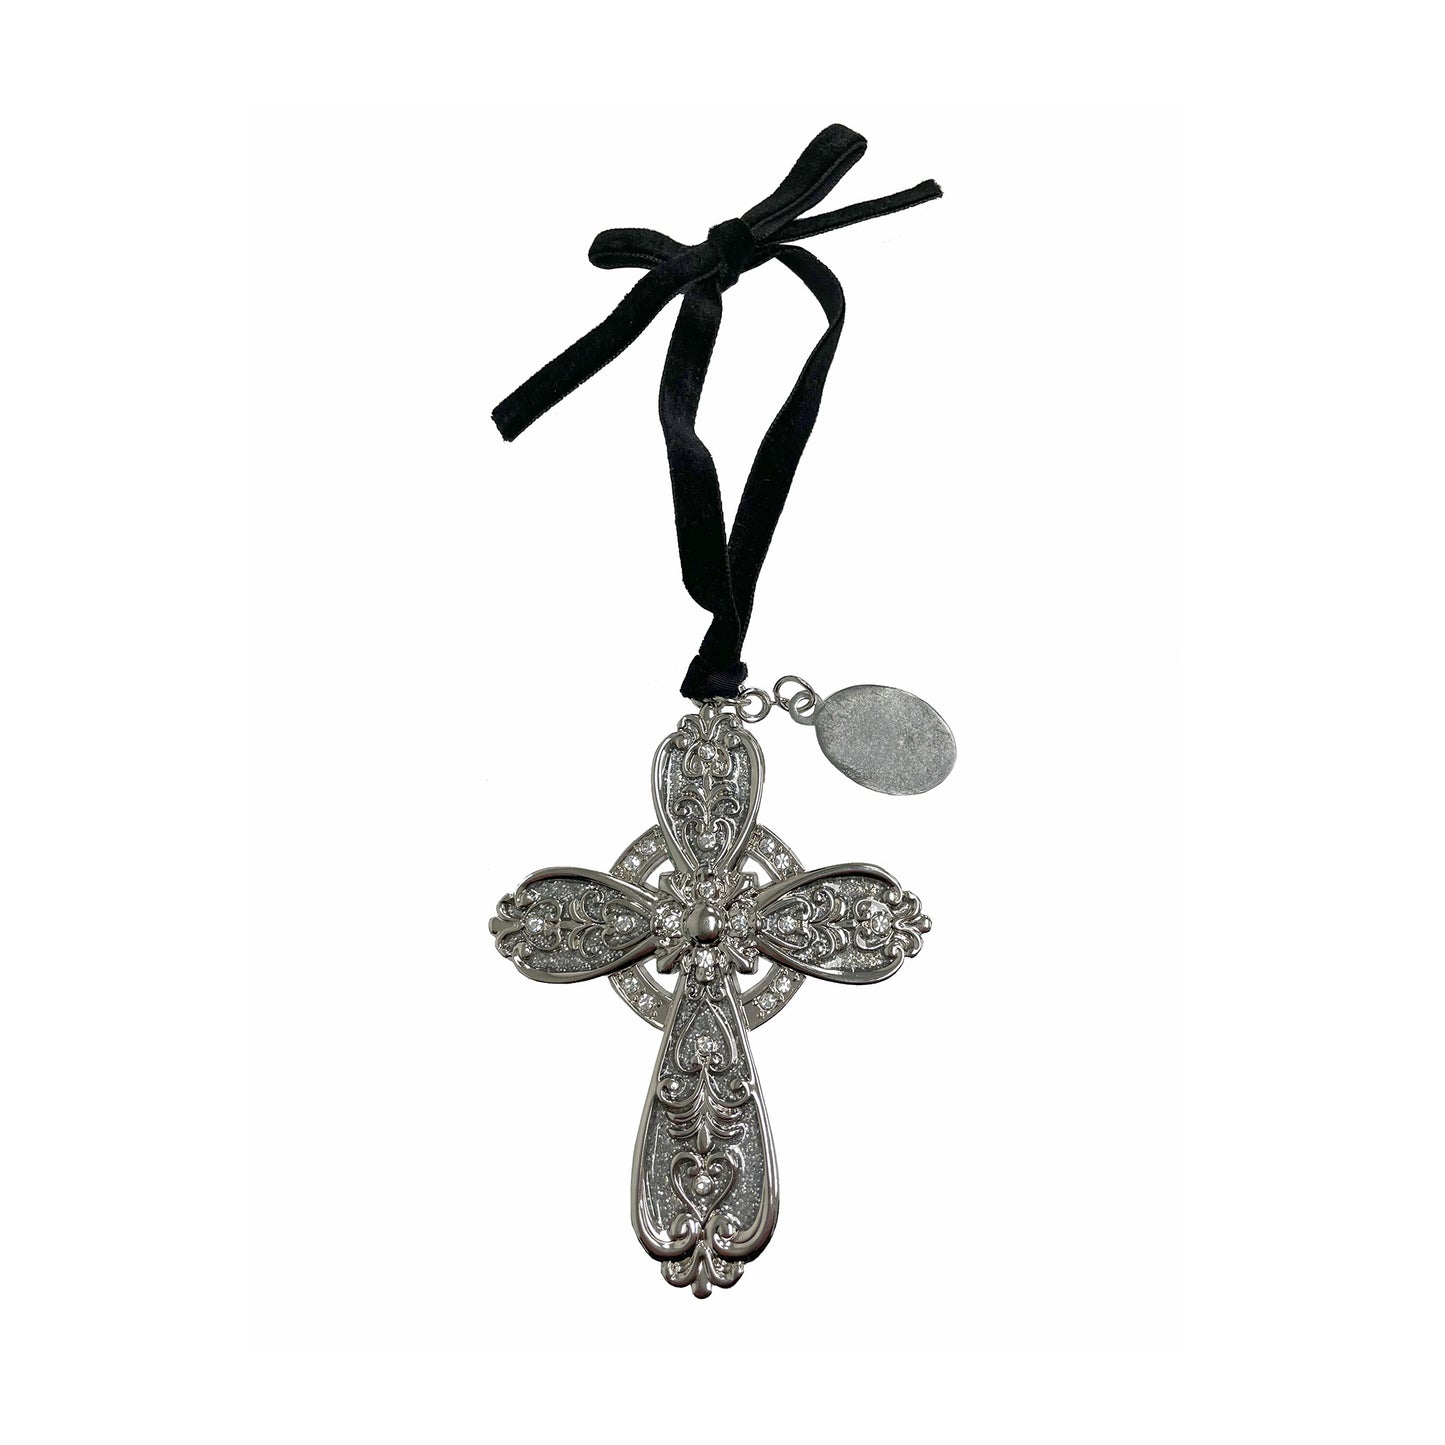 3D Cross Ornament with Engraving Tag